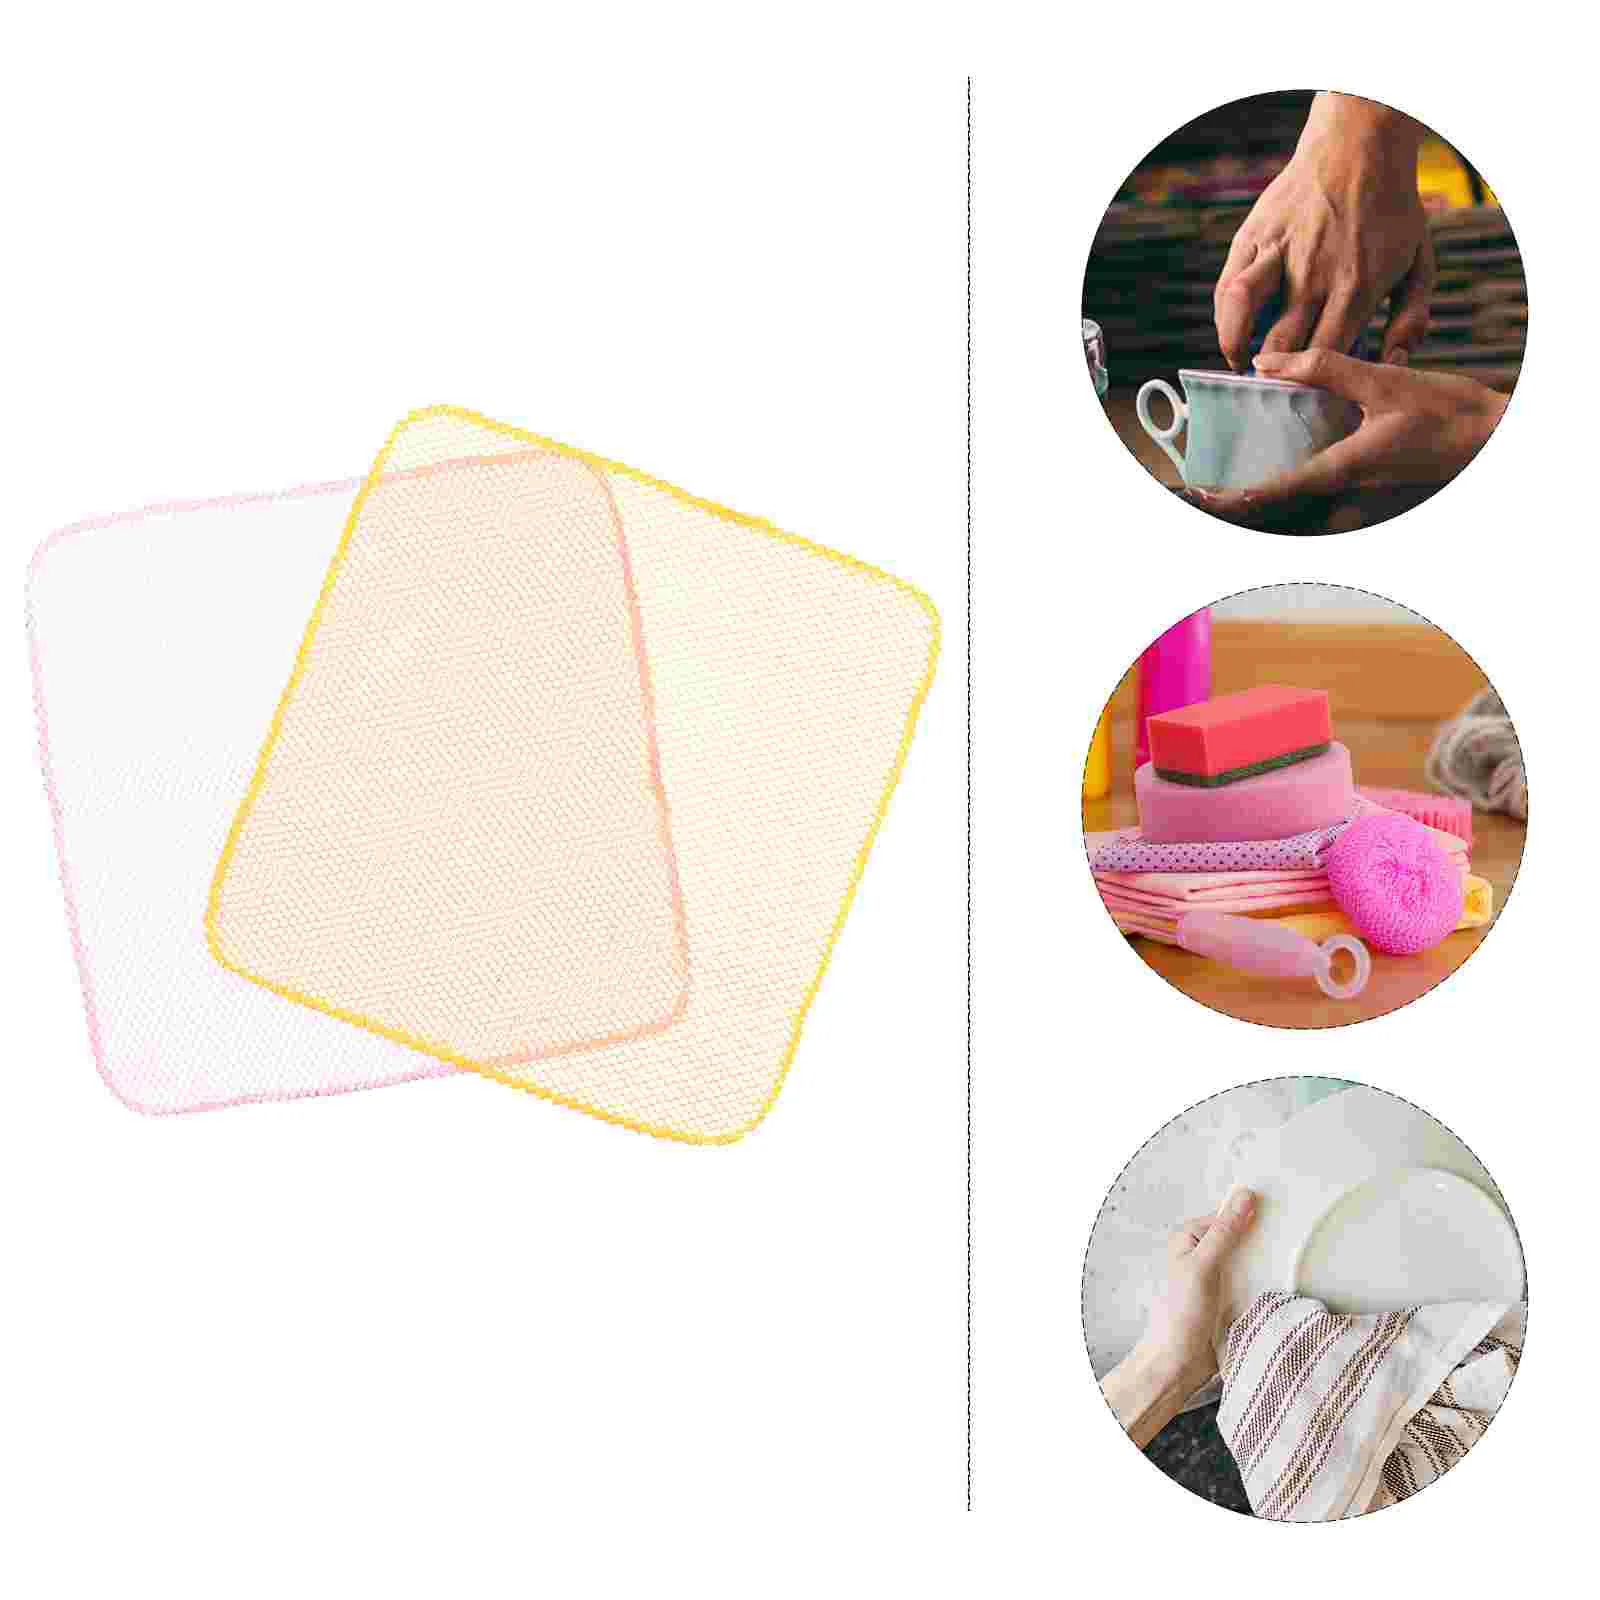 

Dish Cloth Kitchen Washing Cloths Net Cleaning Dishes Towel Scrubber Towels Mesh Wash Hand Sponges Dry Dishwashing Quick Rag